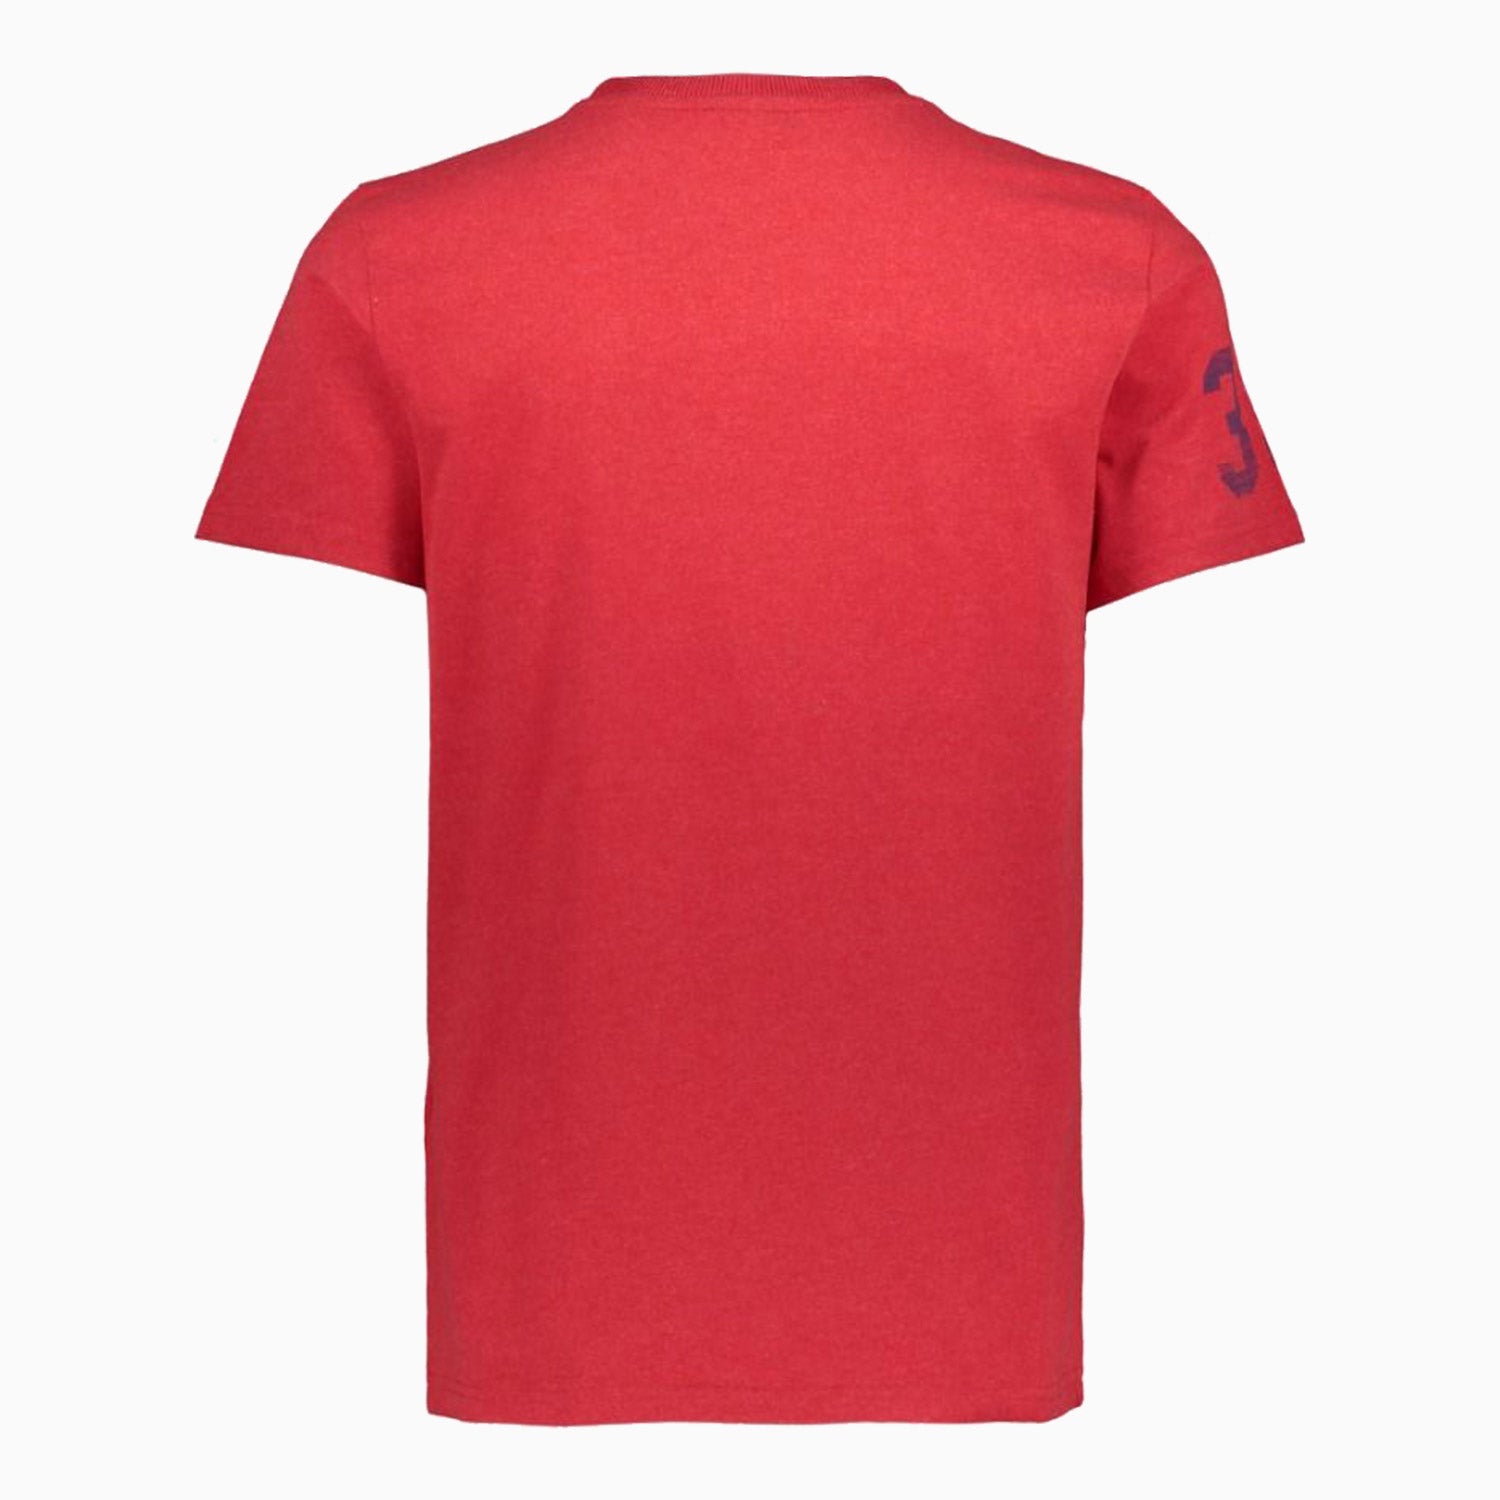 Superdry | Men's T&F Short Sleeve T-Shirt - Color: ROUGE RED MARL - Tops and Bottoms USA -